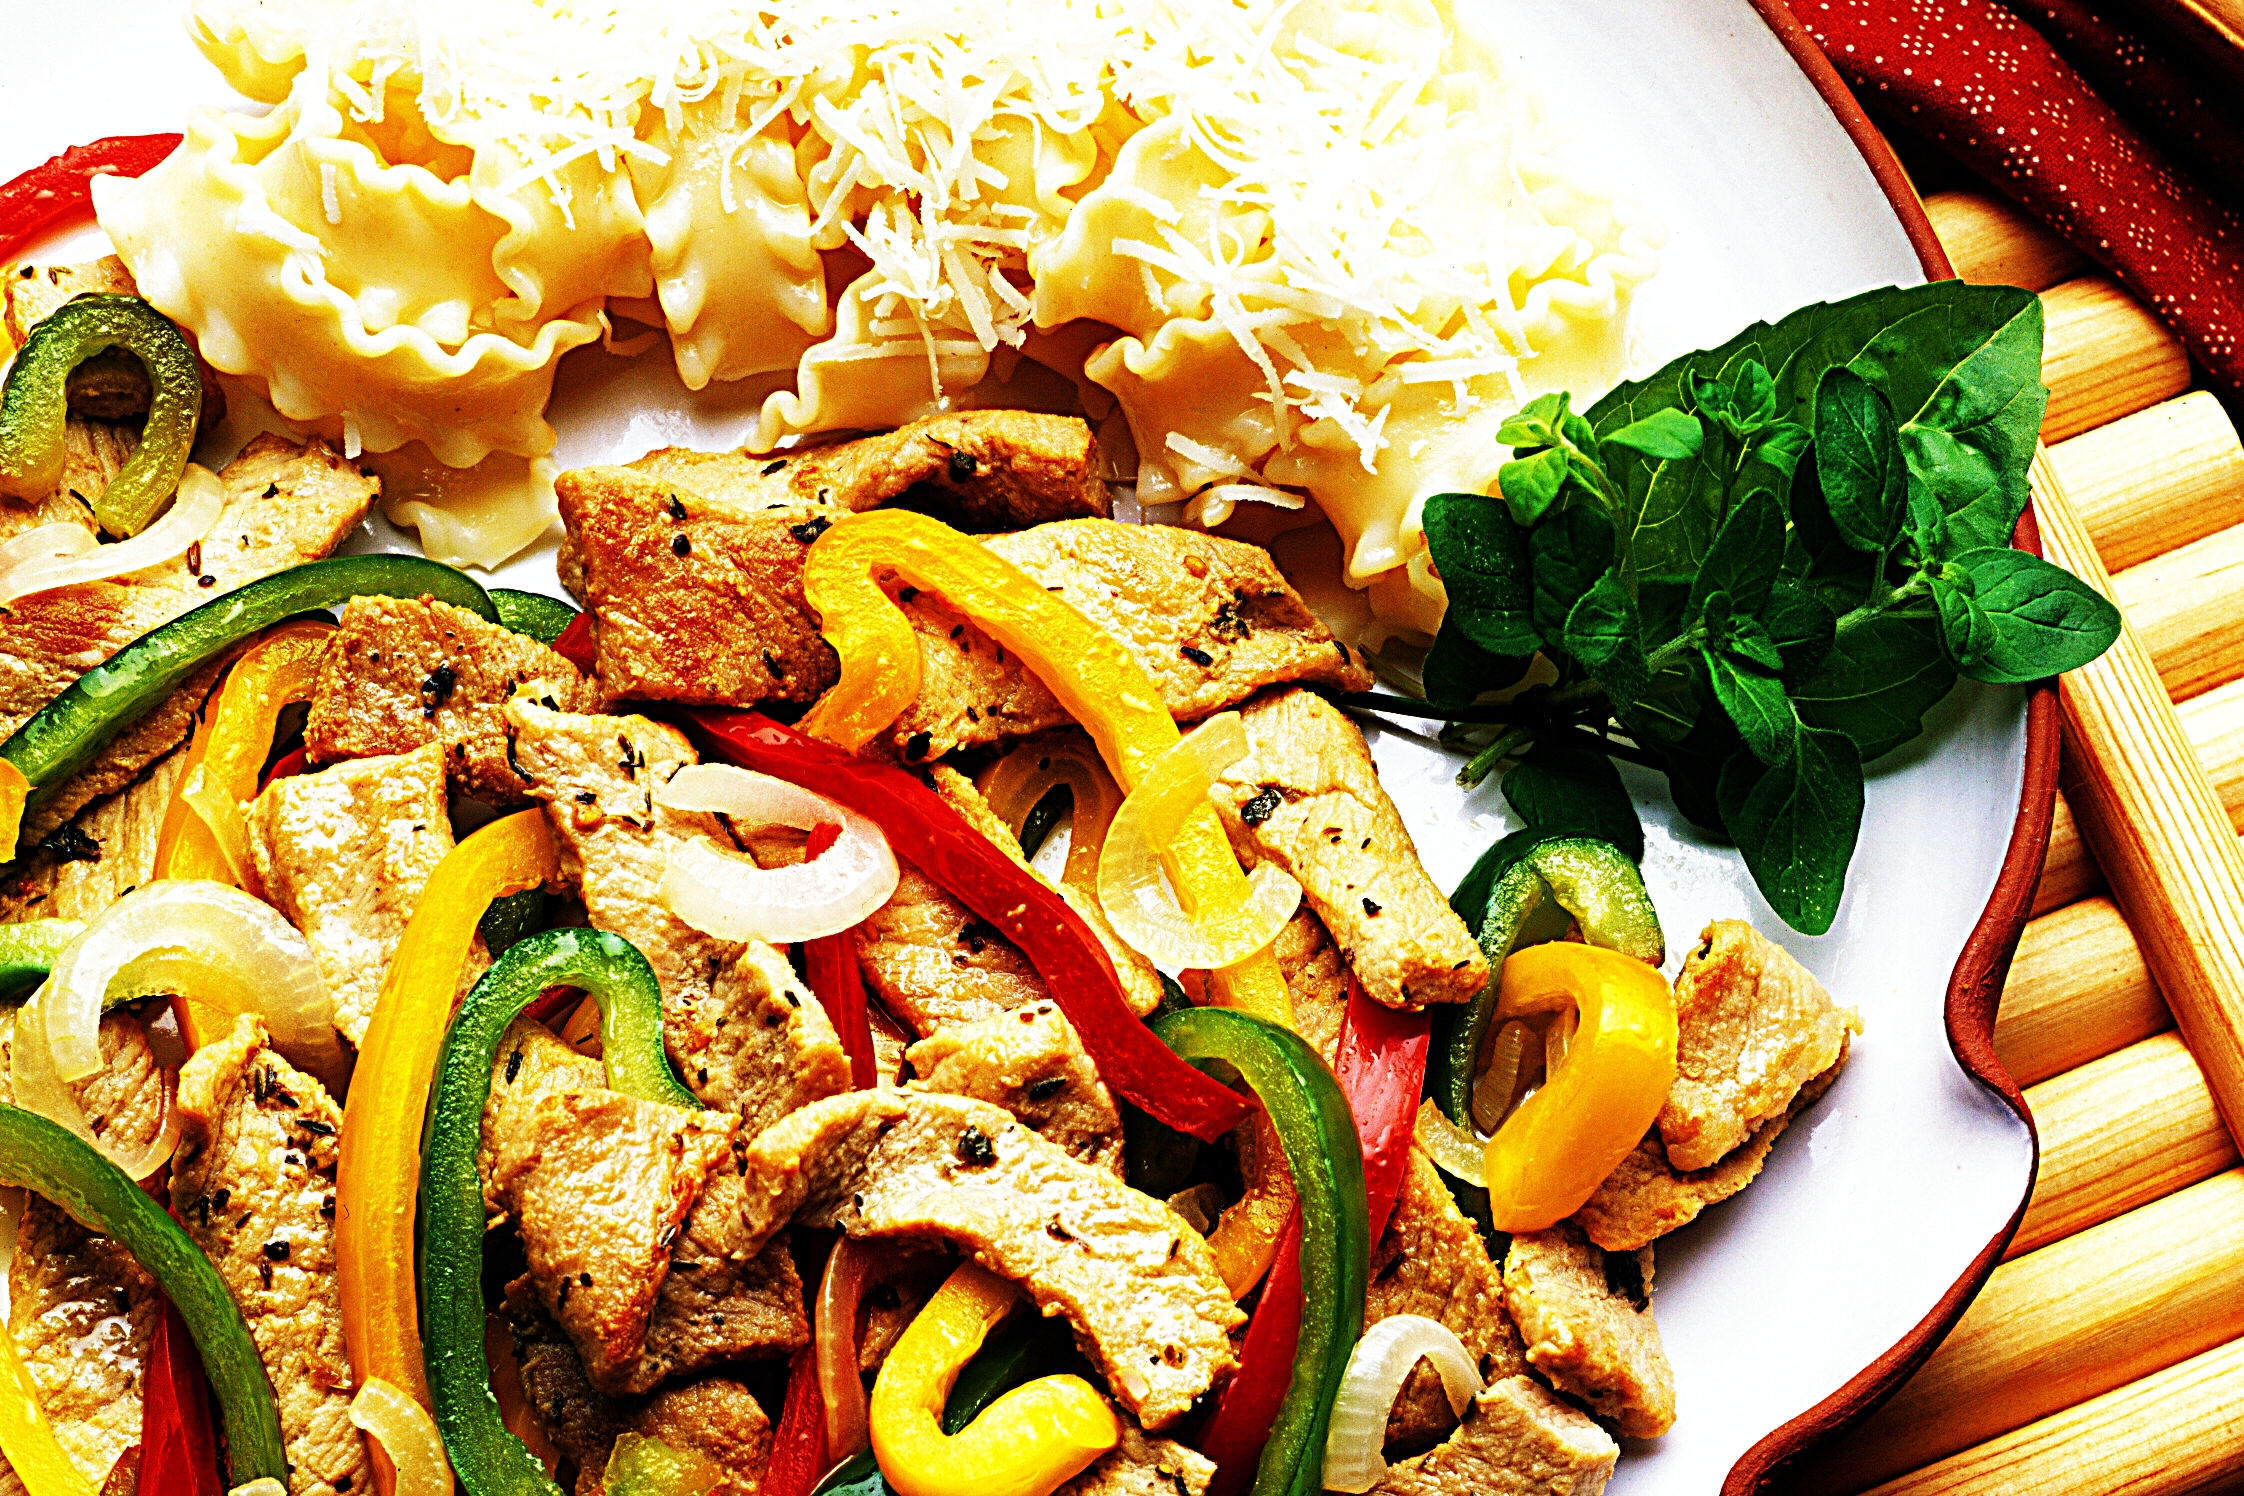 Stupid-Easy Recipe for Southwestern Pork and Pepper Stir-fry (#1 Top-Rated)